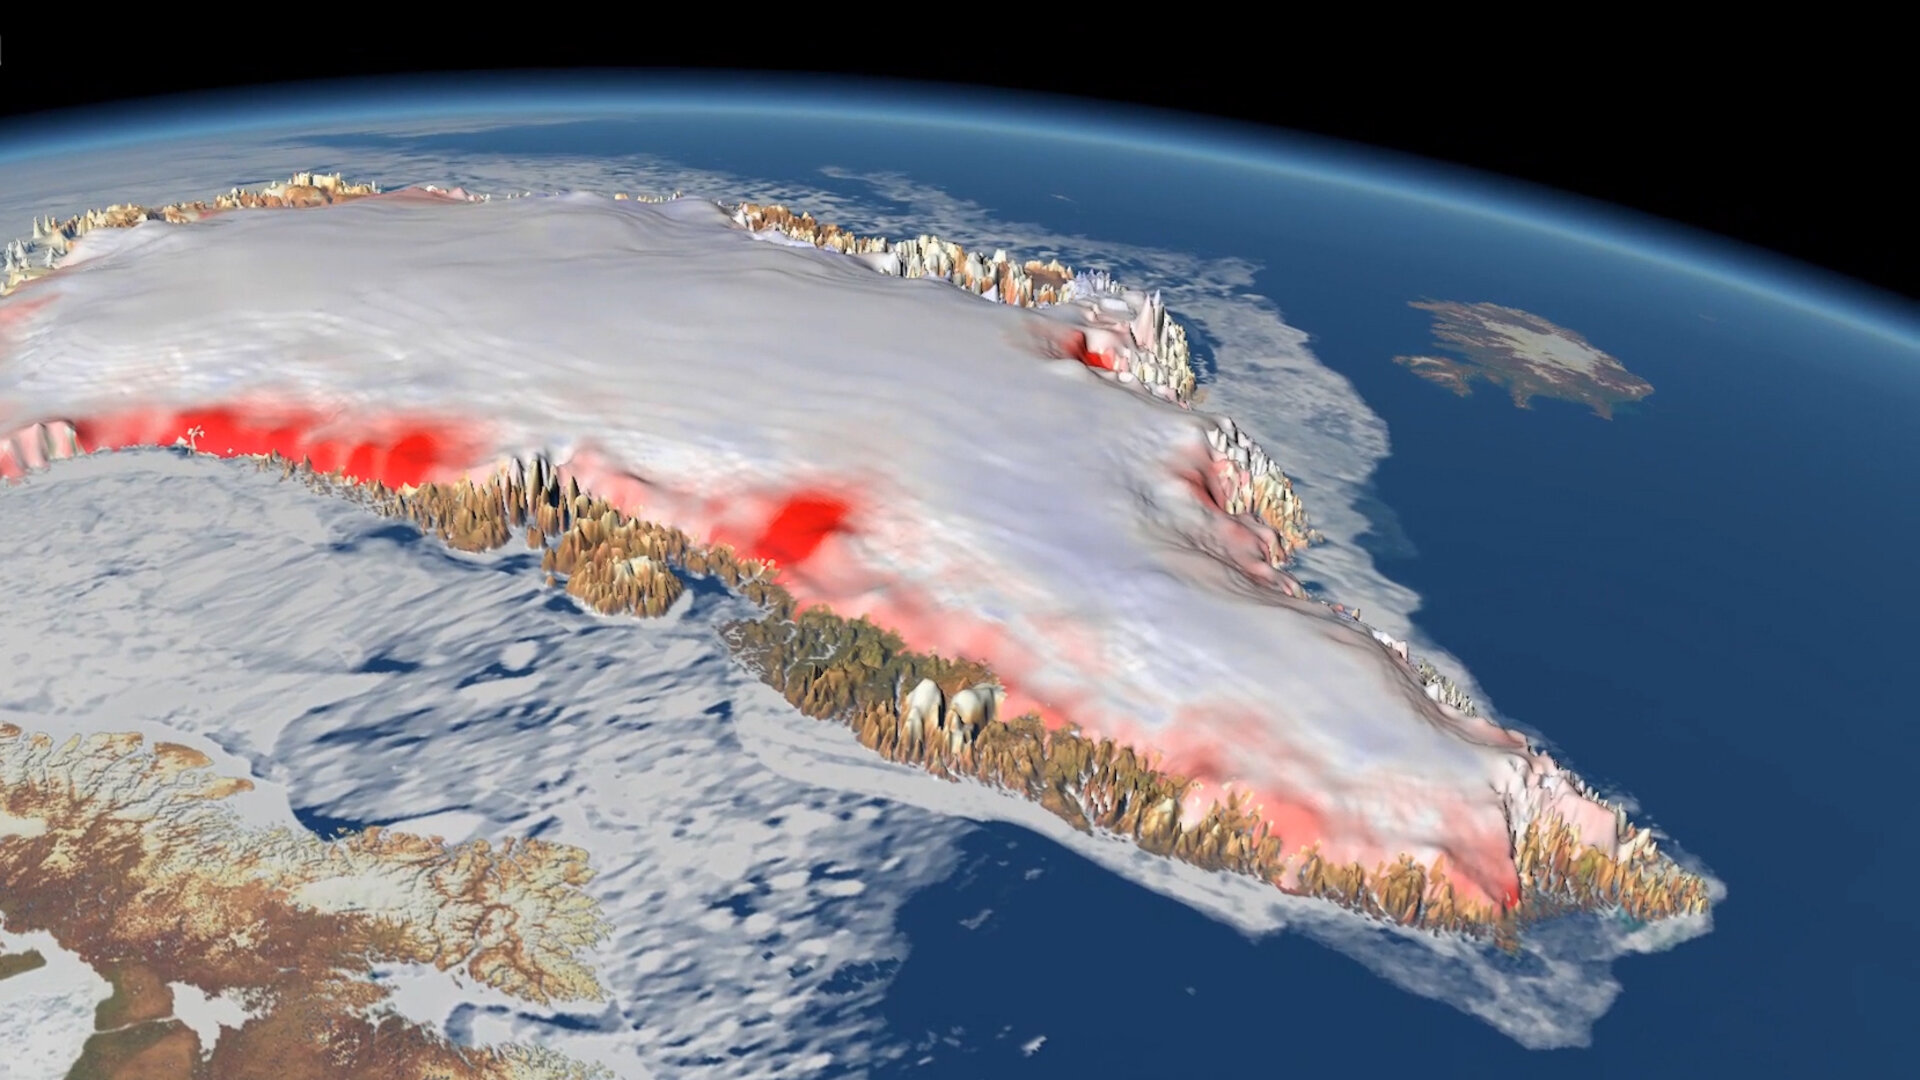 ESA - Cumulative change in Greenland's ice sheet thickness